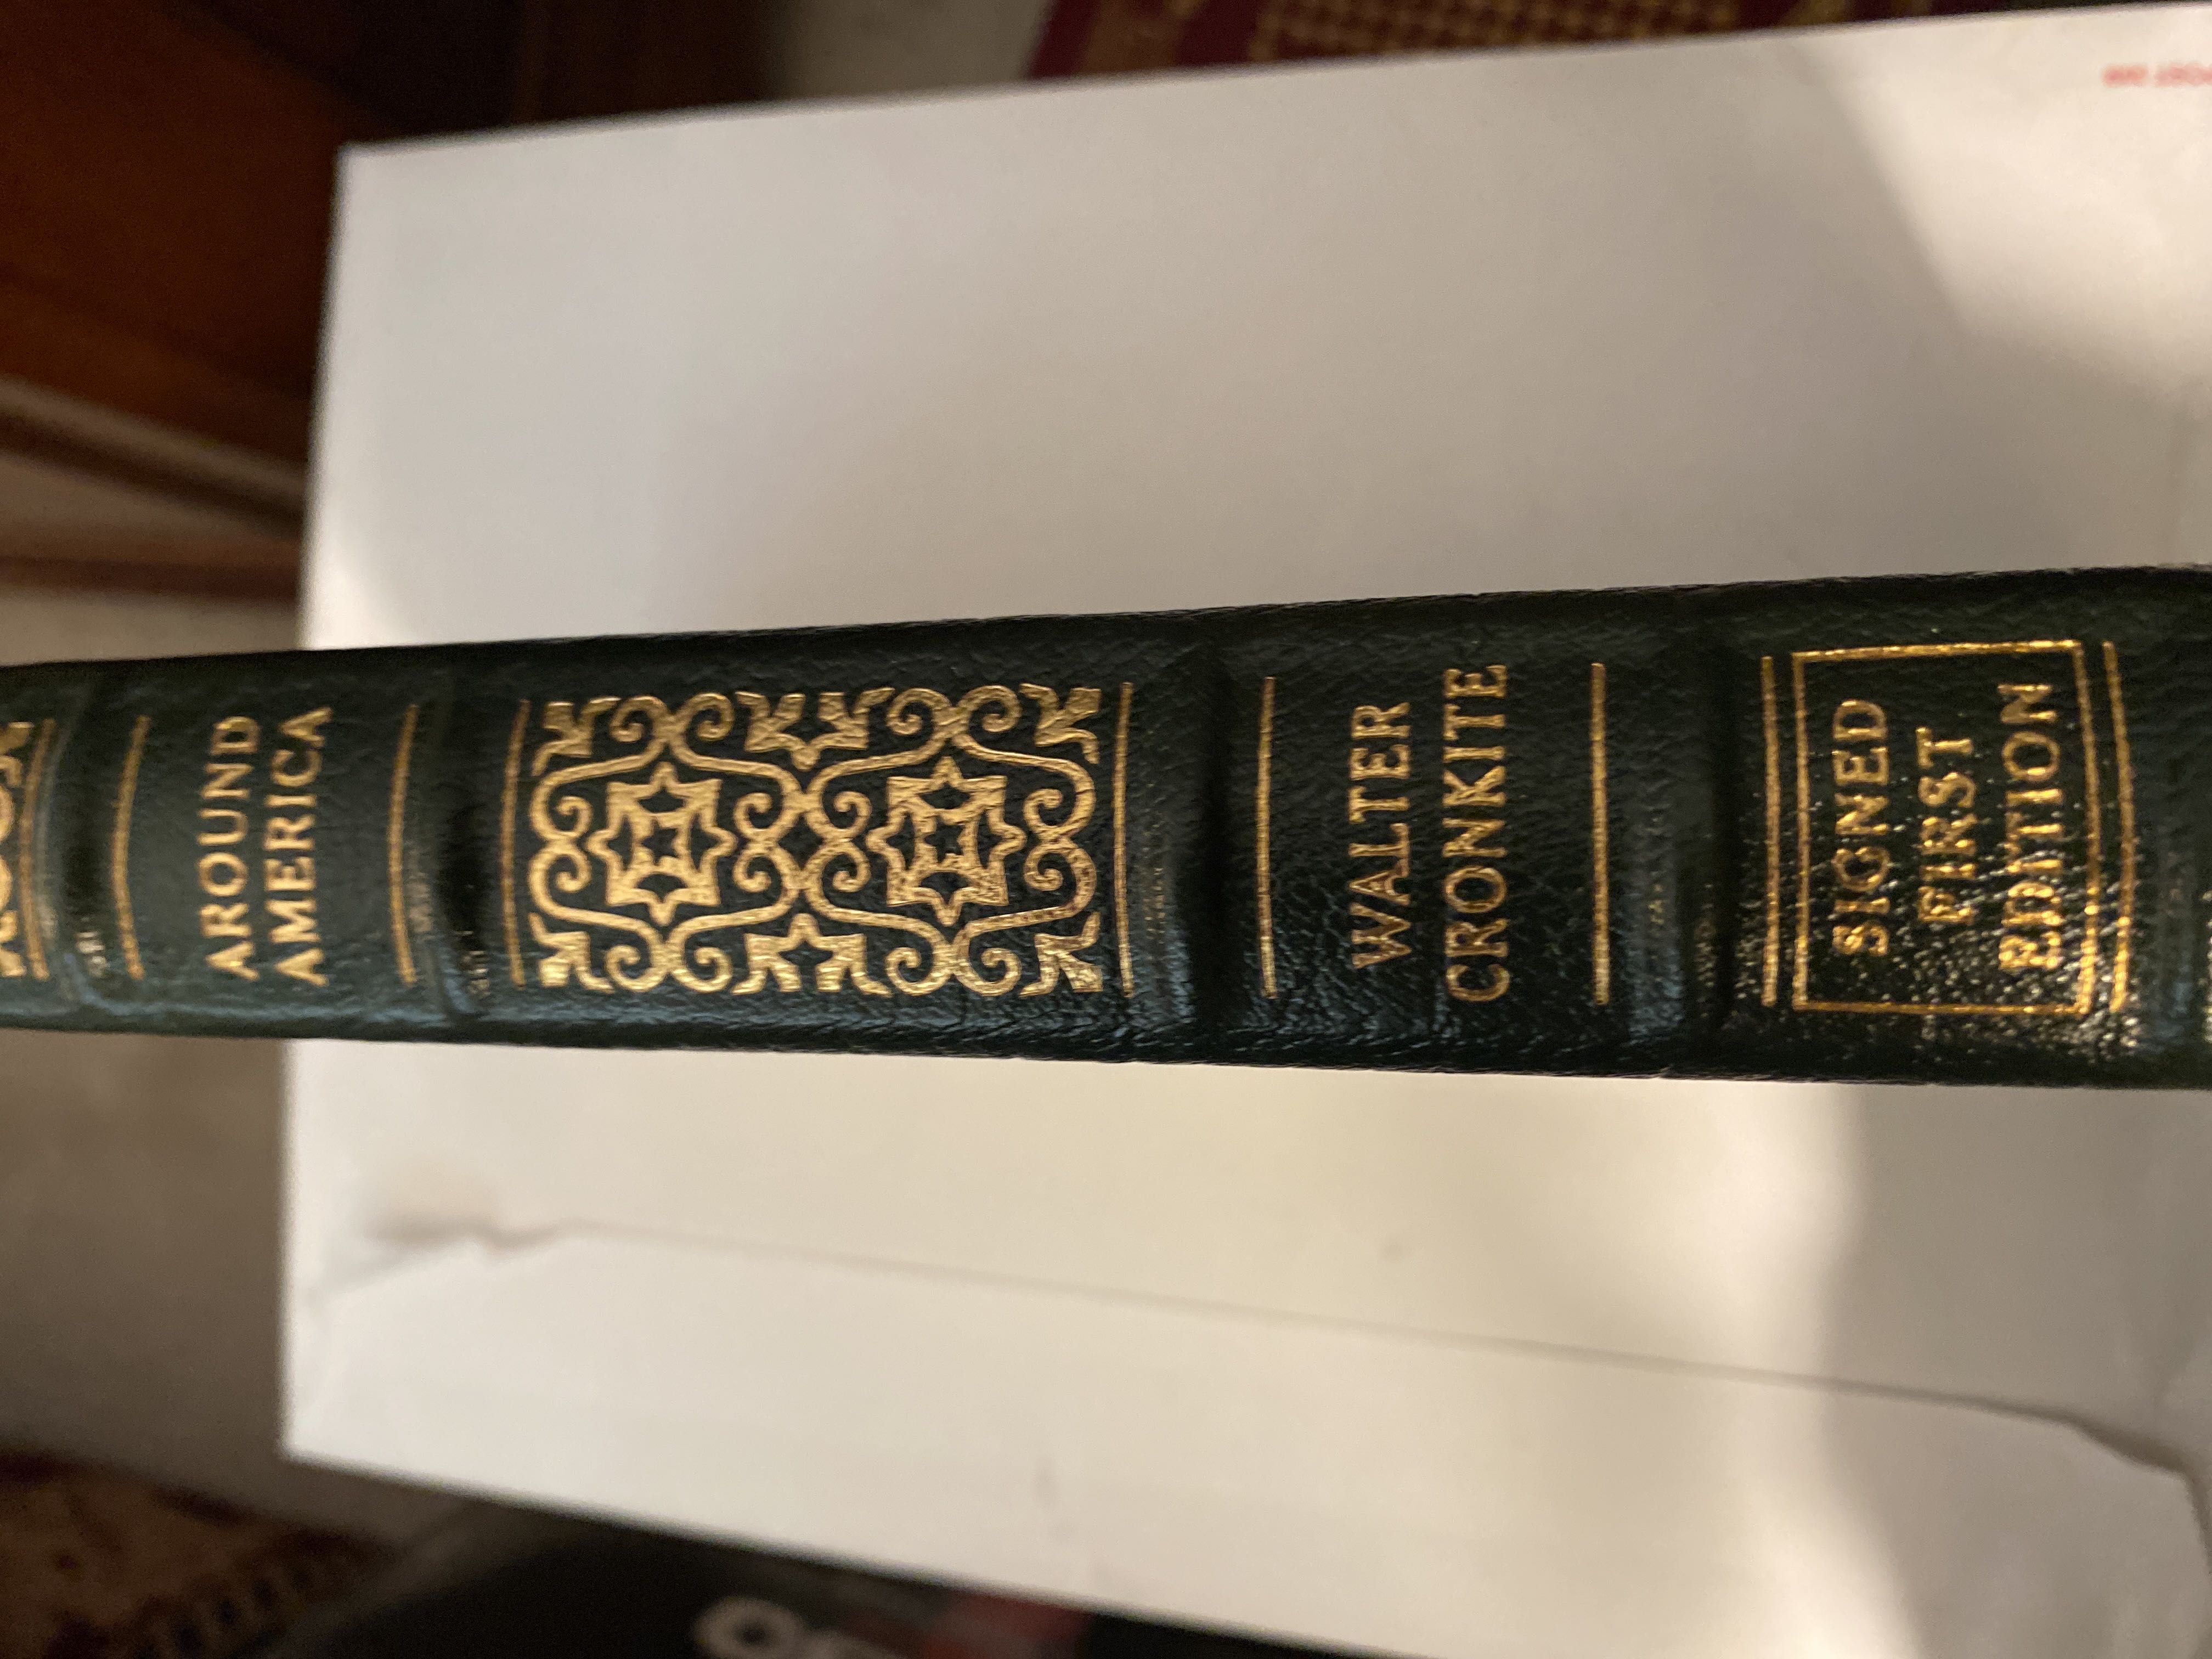 Around America, A Tour of Our Magnificent Coastlines - Walter Cronkite (Easton Press - Sewn Binding) book collectible [Barcode 9780393323351] - Main Image 2